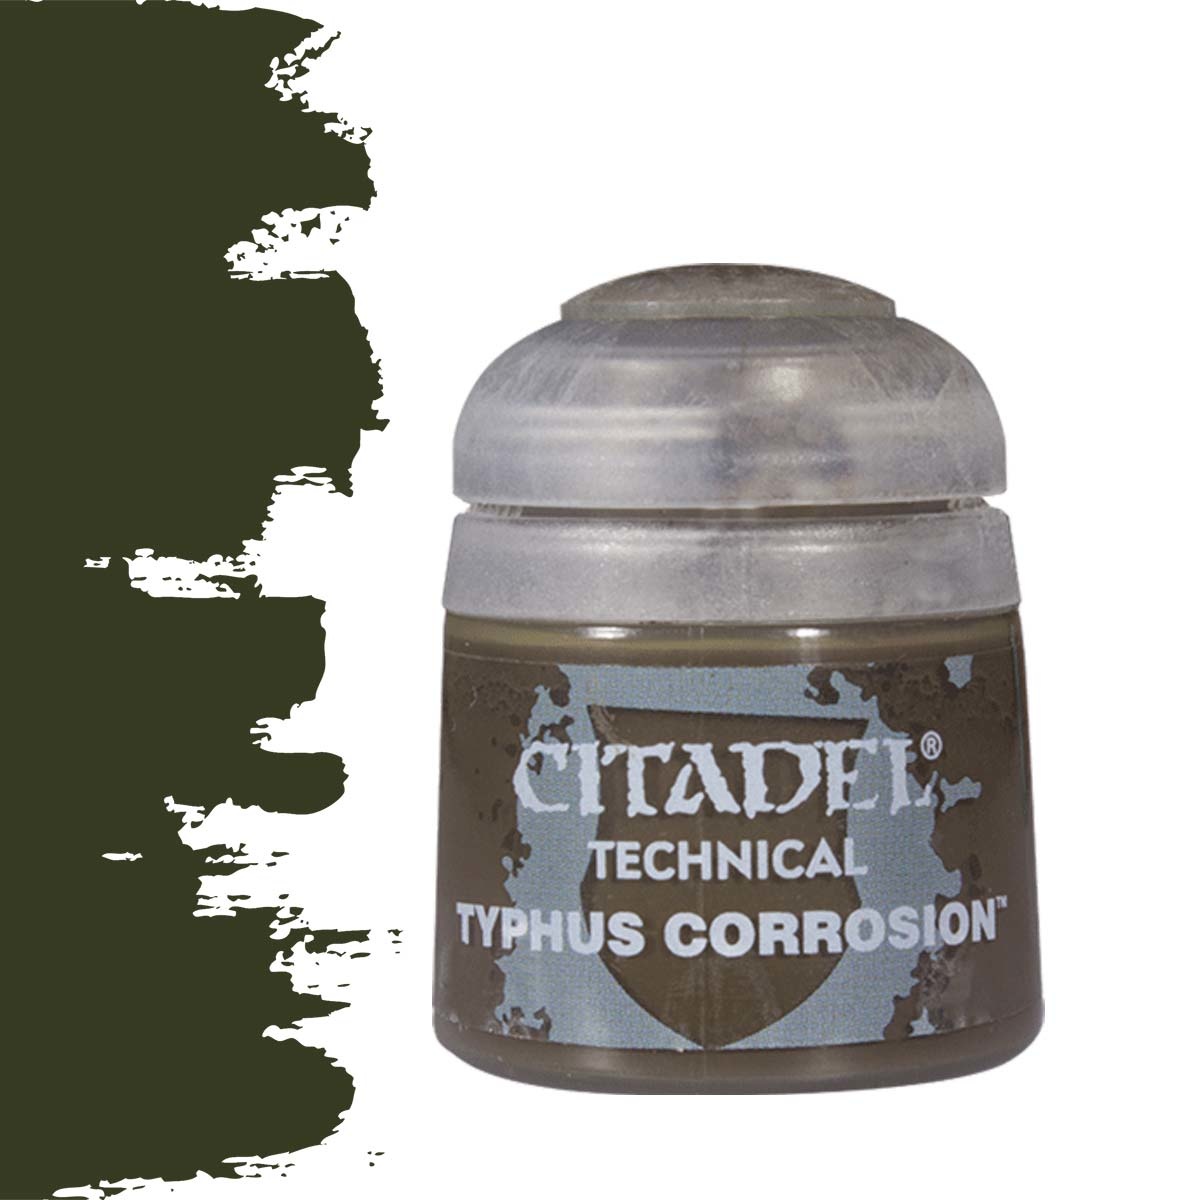 Citadel Typhus Corrosion - Technical Paint - 12ml - 27-10 - Buy now at ...